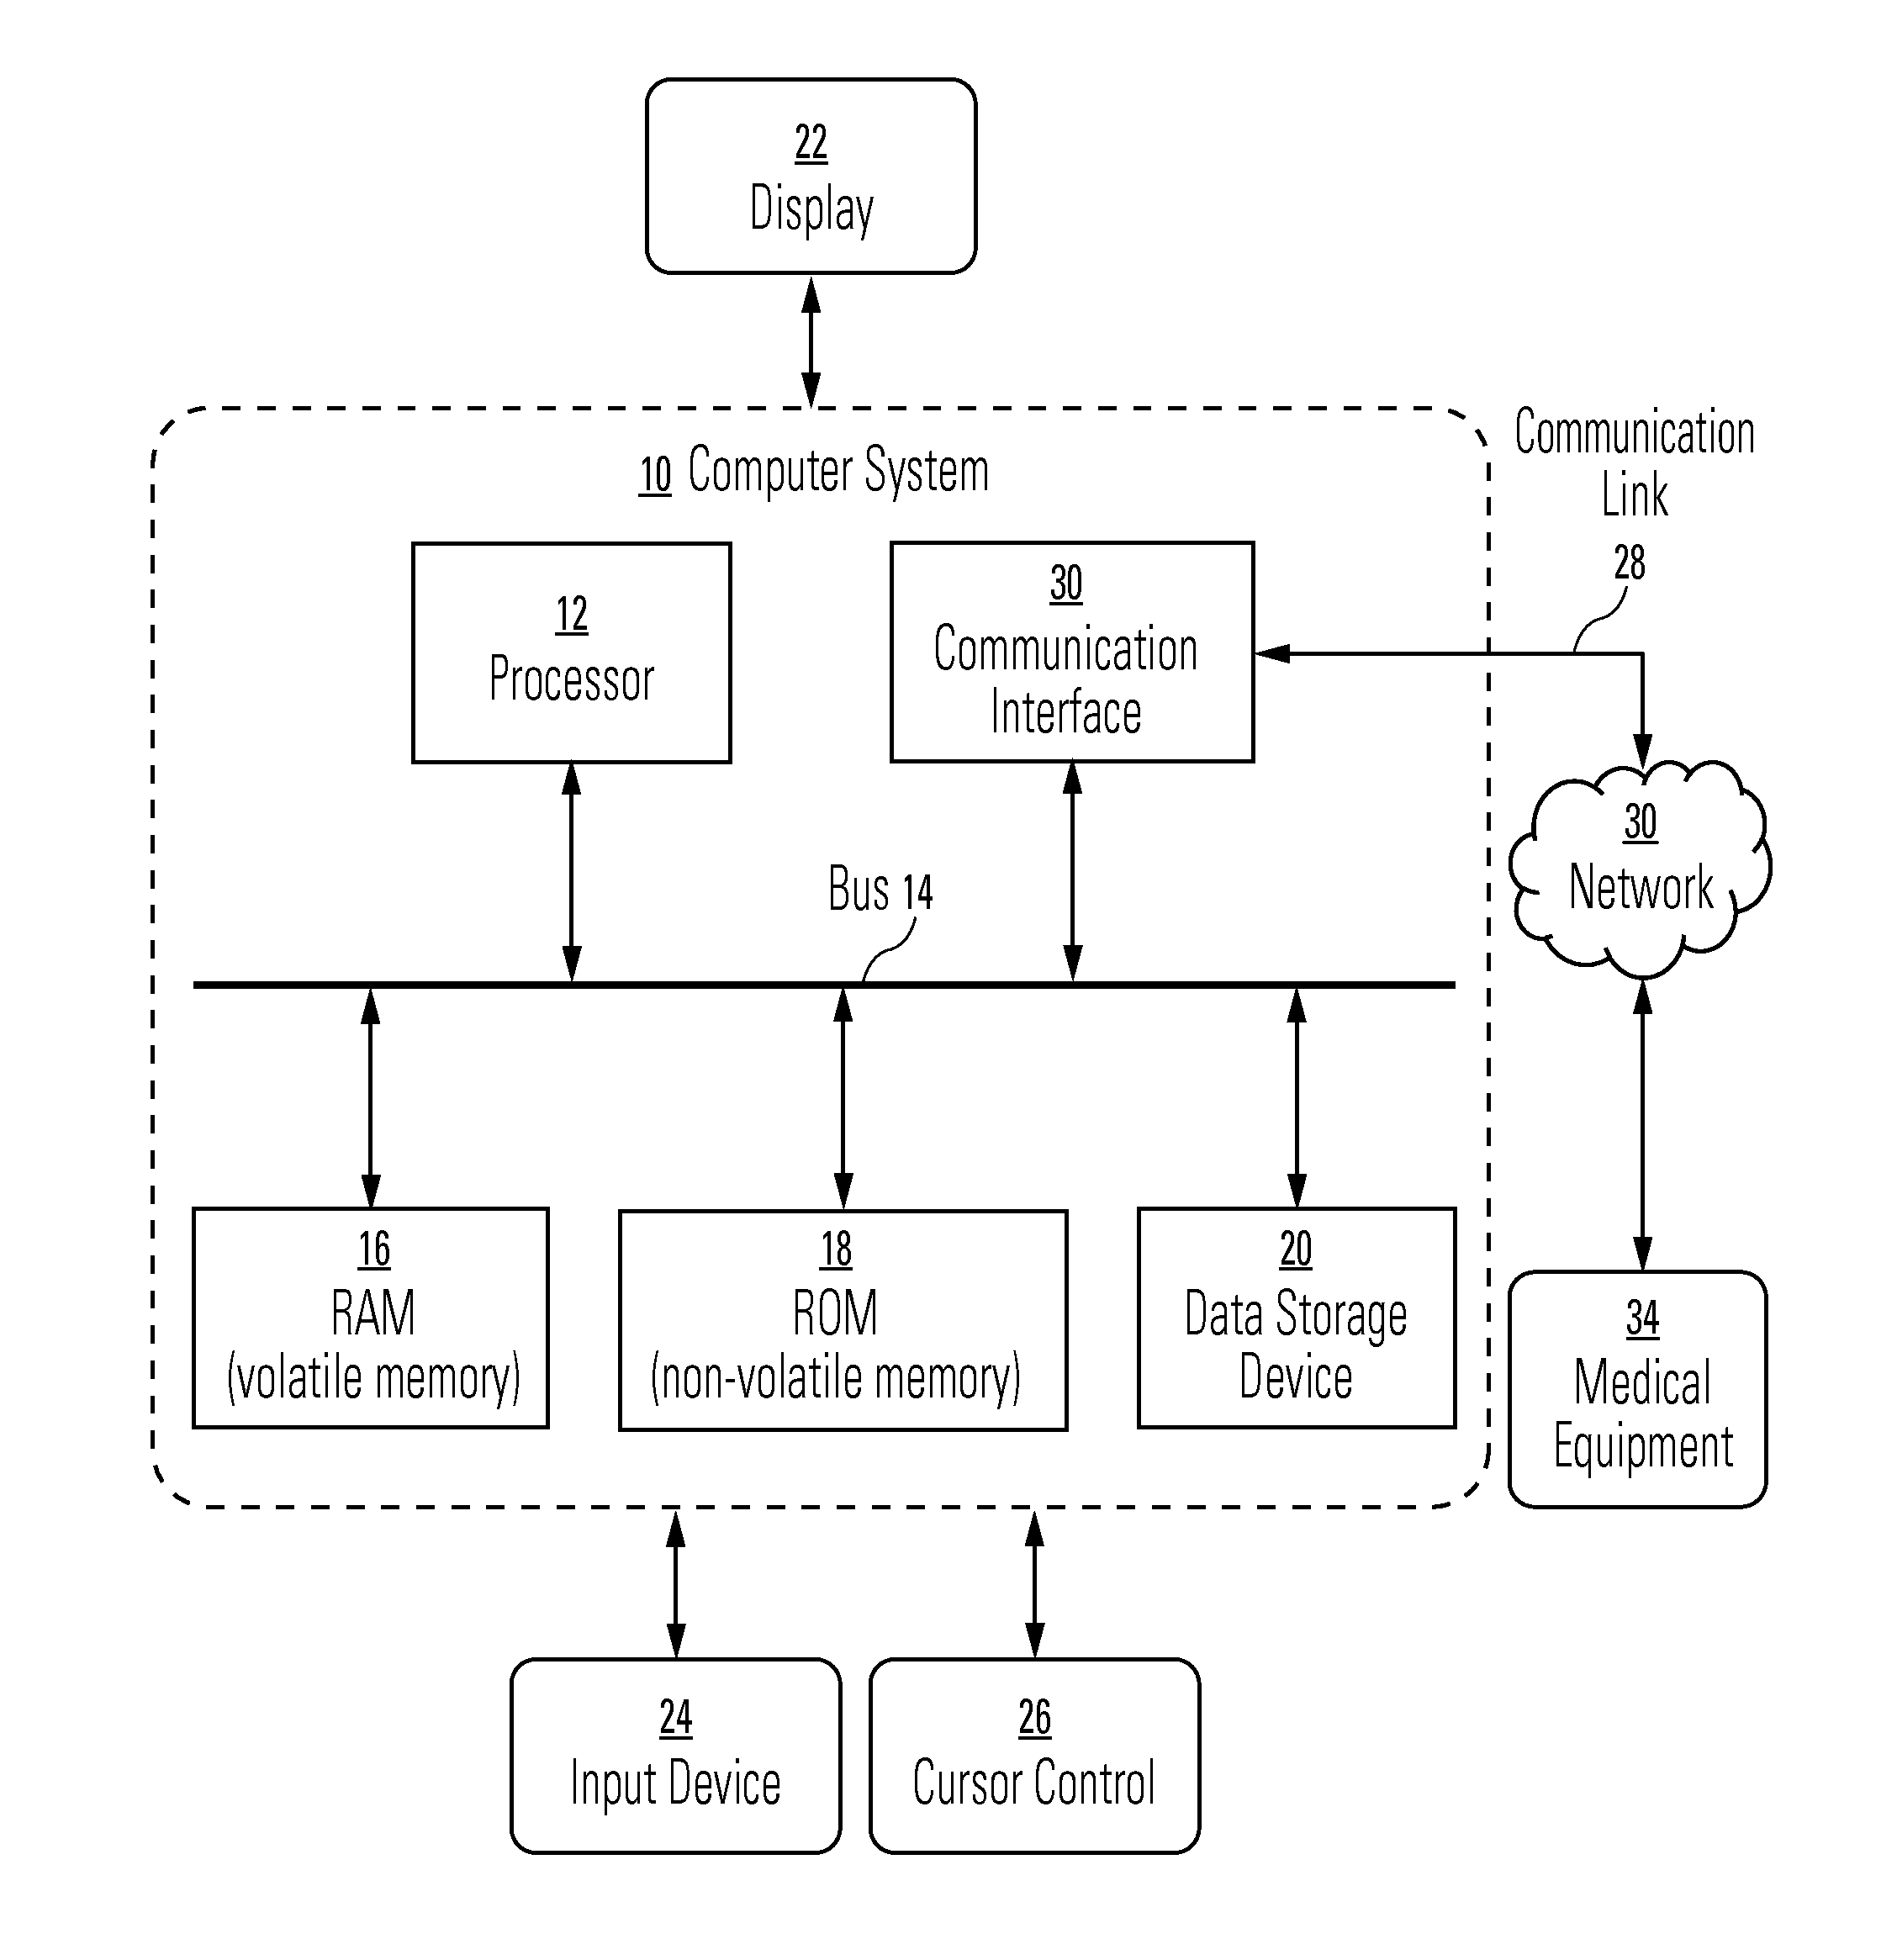 Method and system for interactive control of window/level parameters of multi-image displays